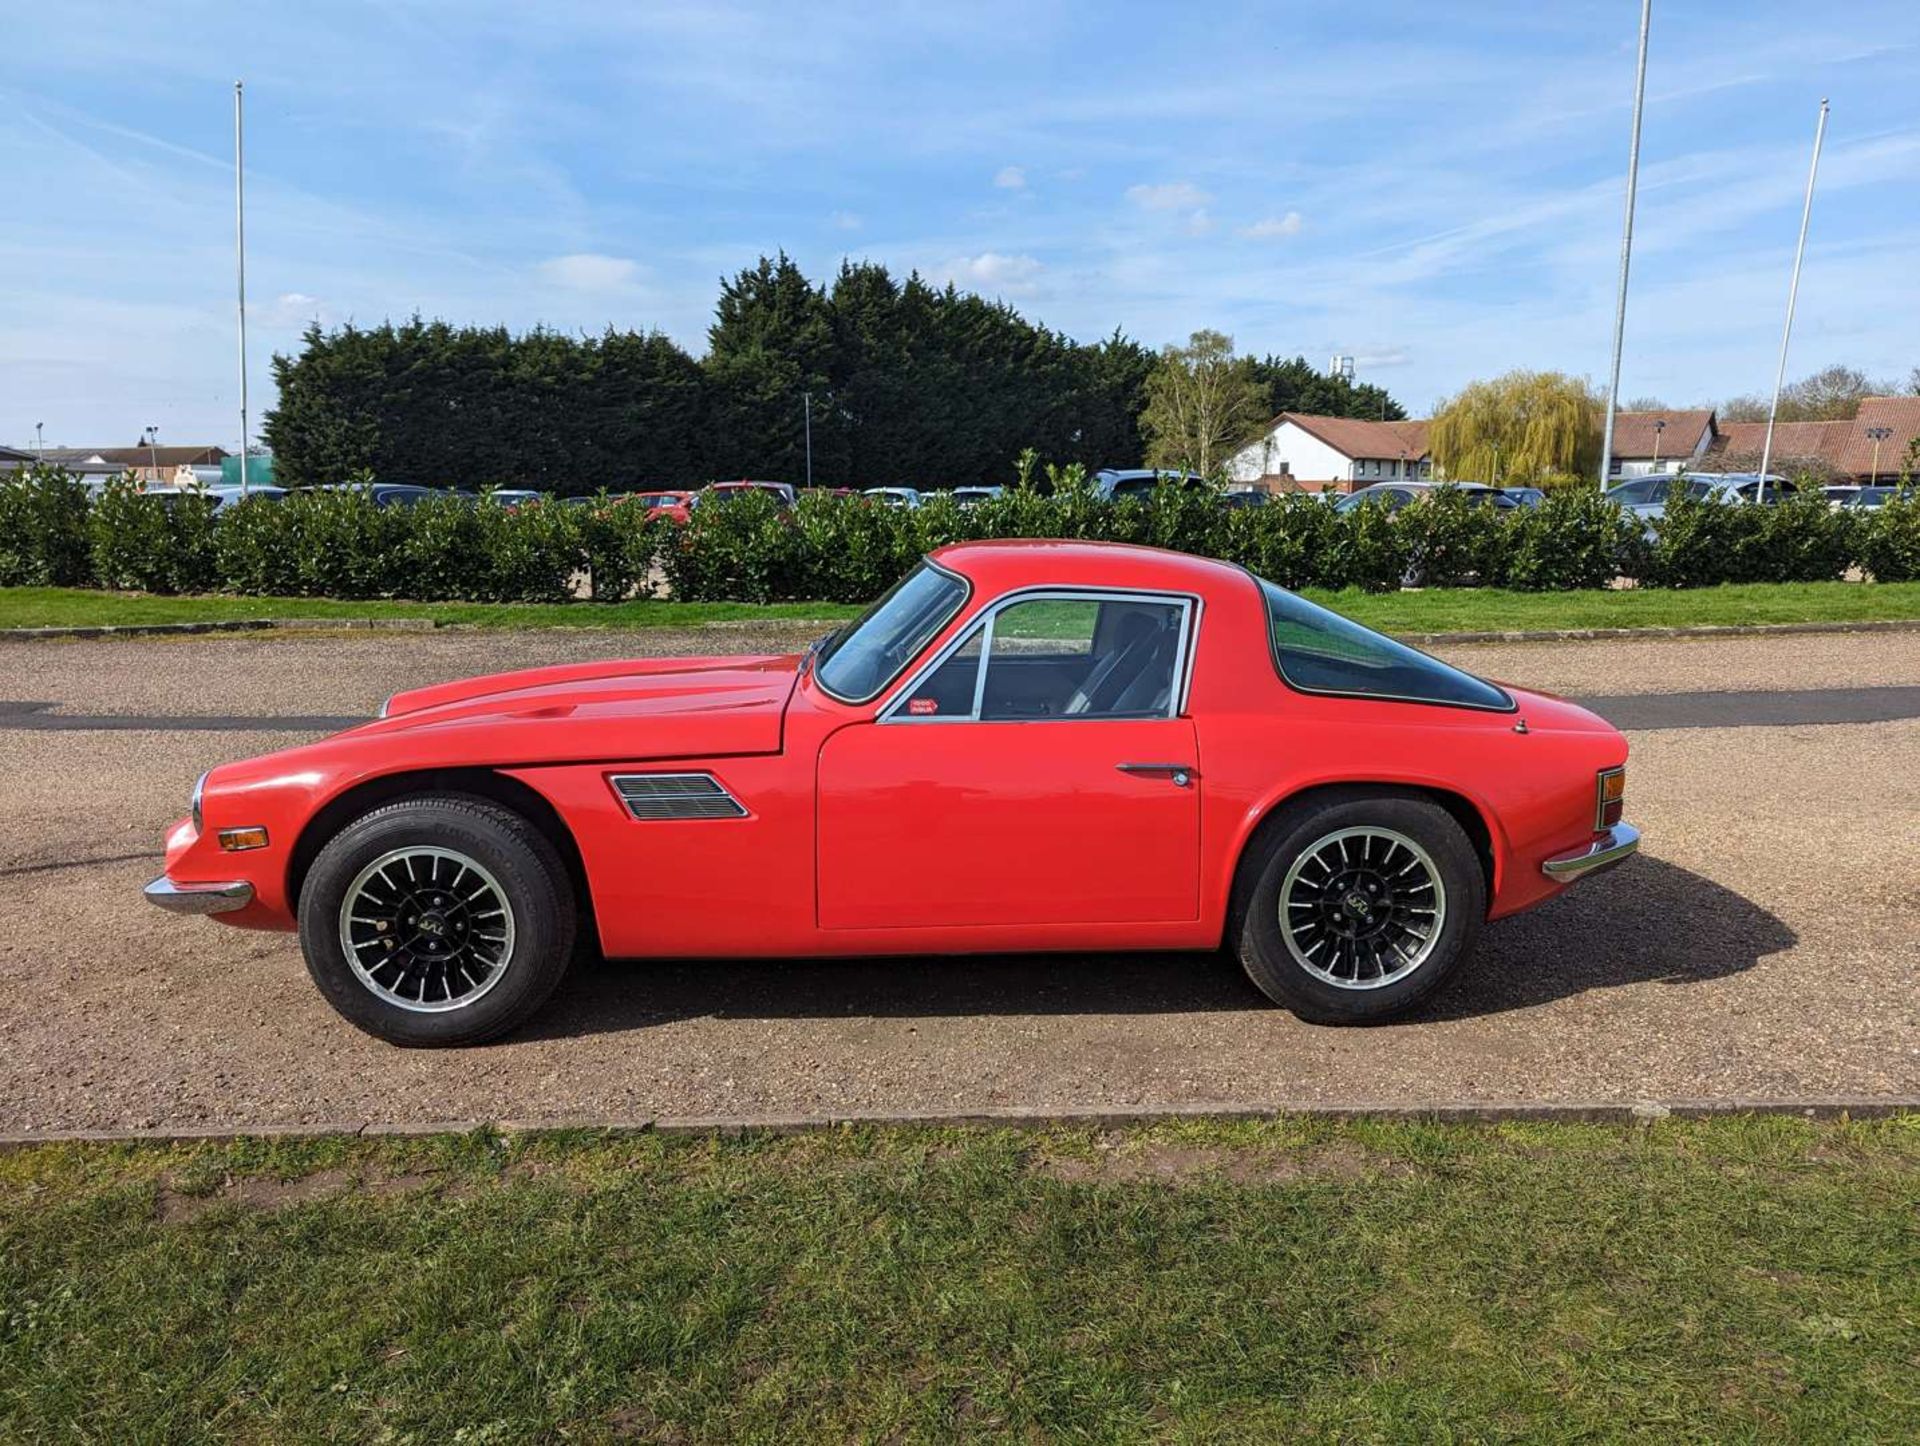 1972 TVR 2500M - Image 4 of 27